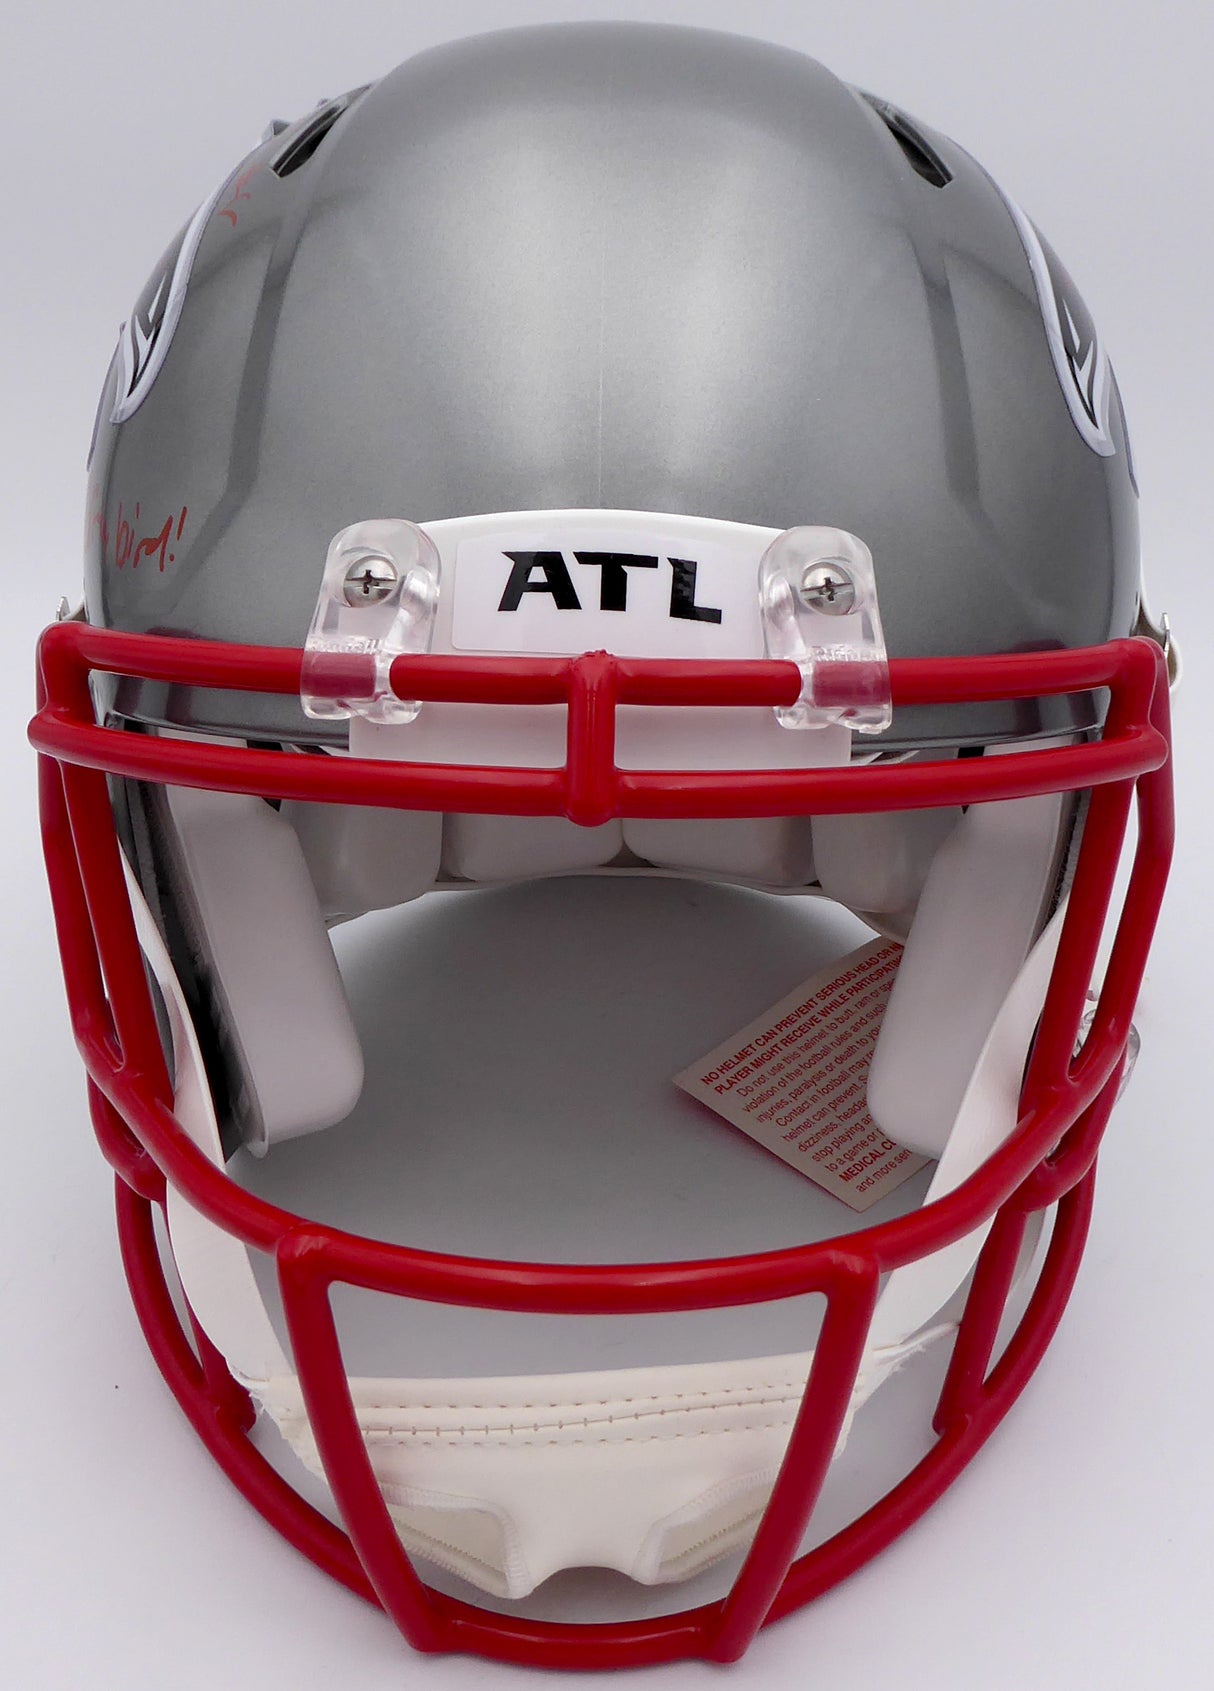 Kyle Pitts Autographed Atlanta Falcons Flash Silver Full Size Authentic Speed Helmet "Dirty Bird" (Smudge) Beckett BAS QR #WL25816